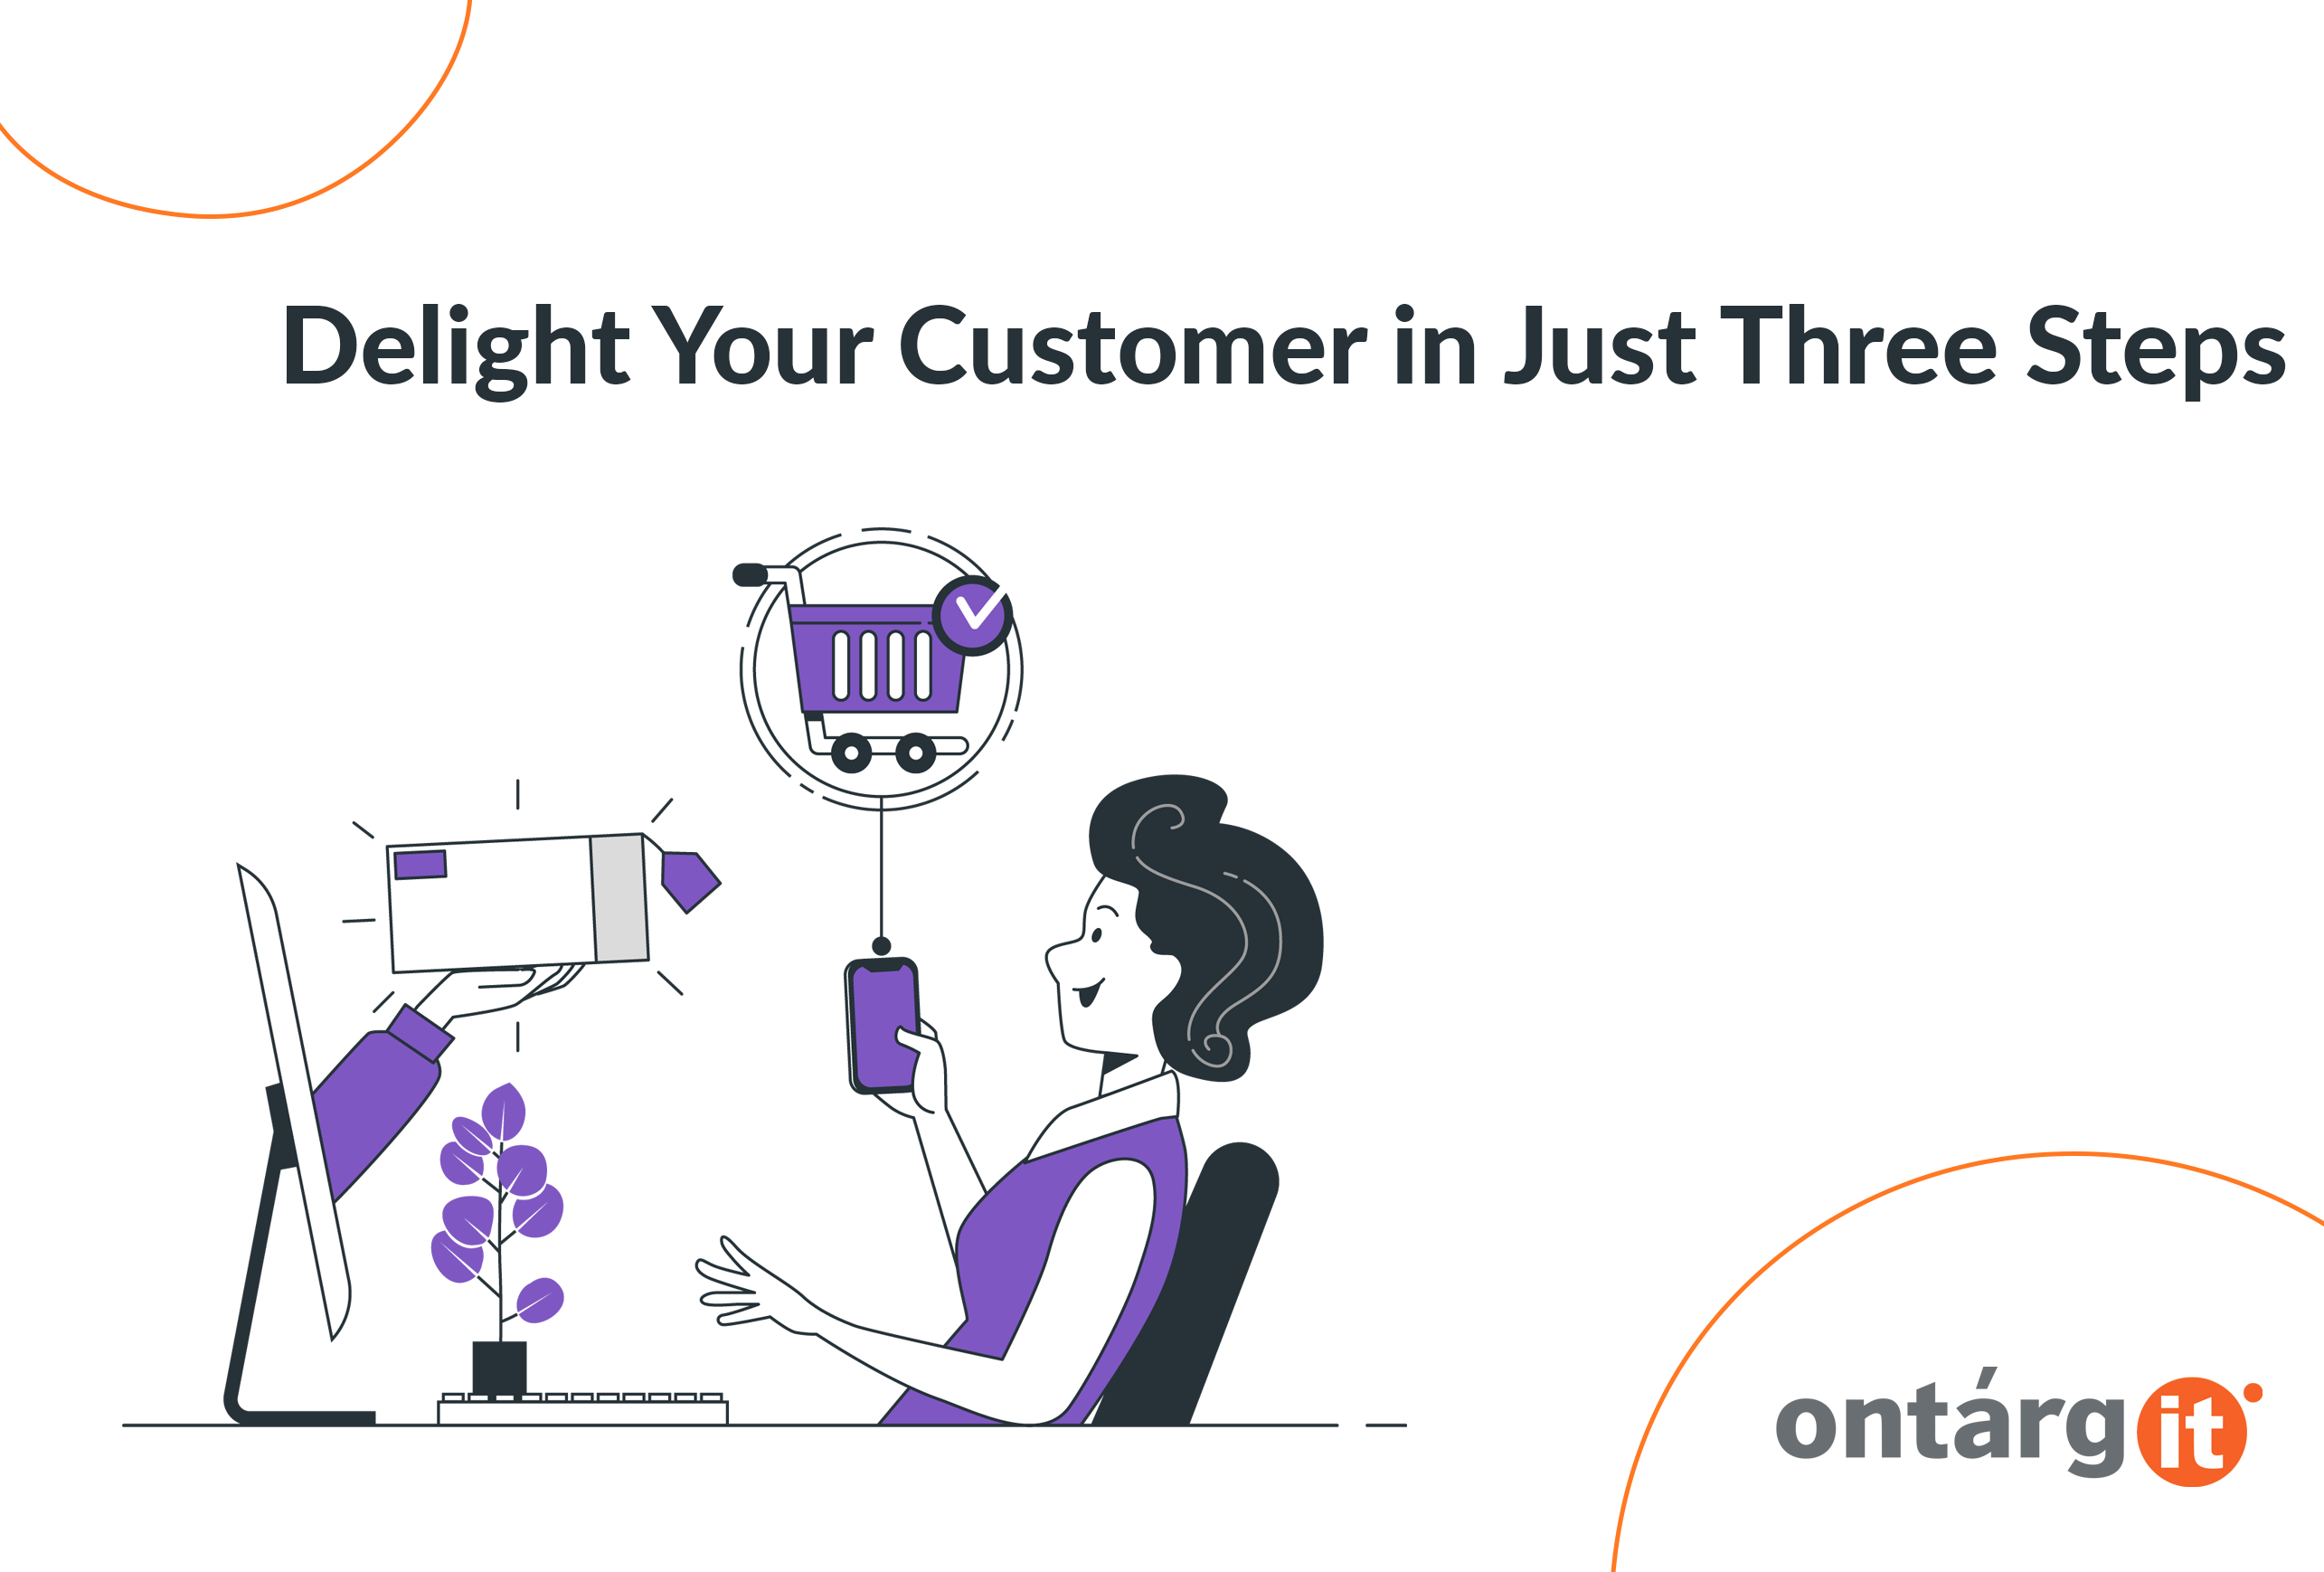 holistic relationship strategy Delight Your Customer in Just Three Steps